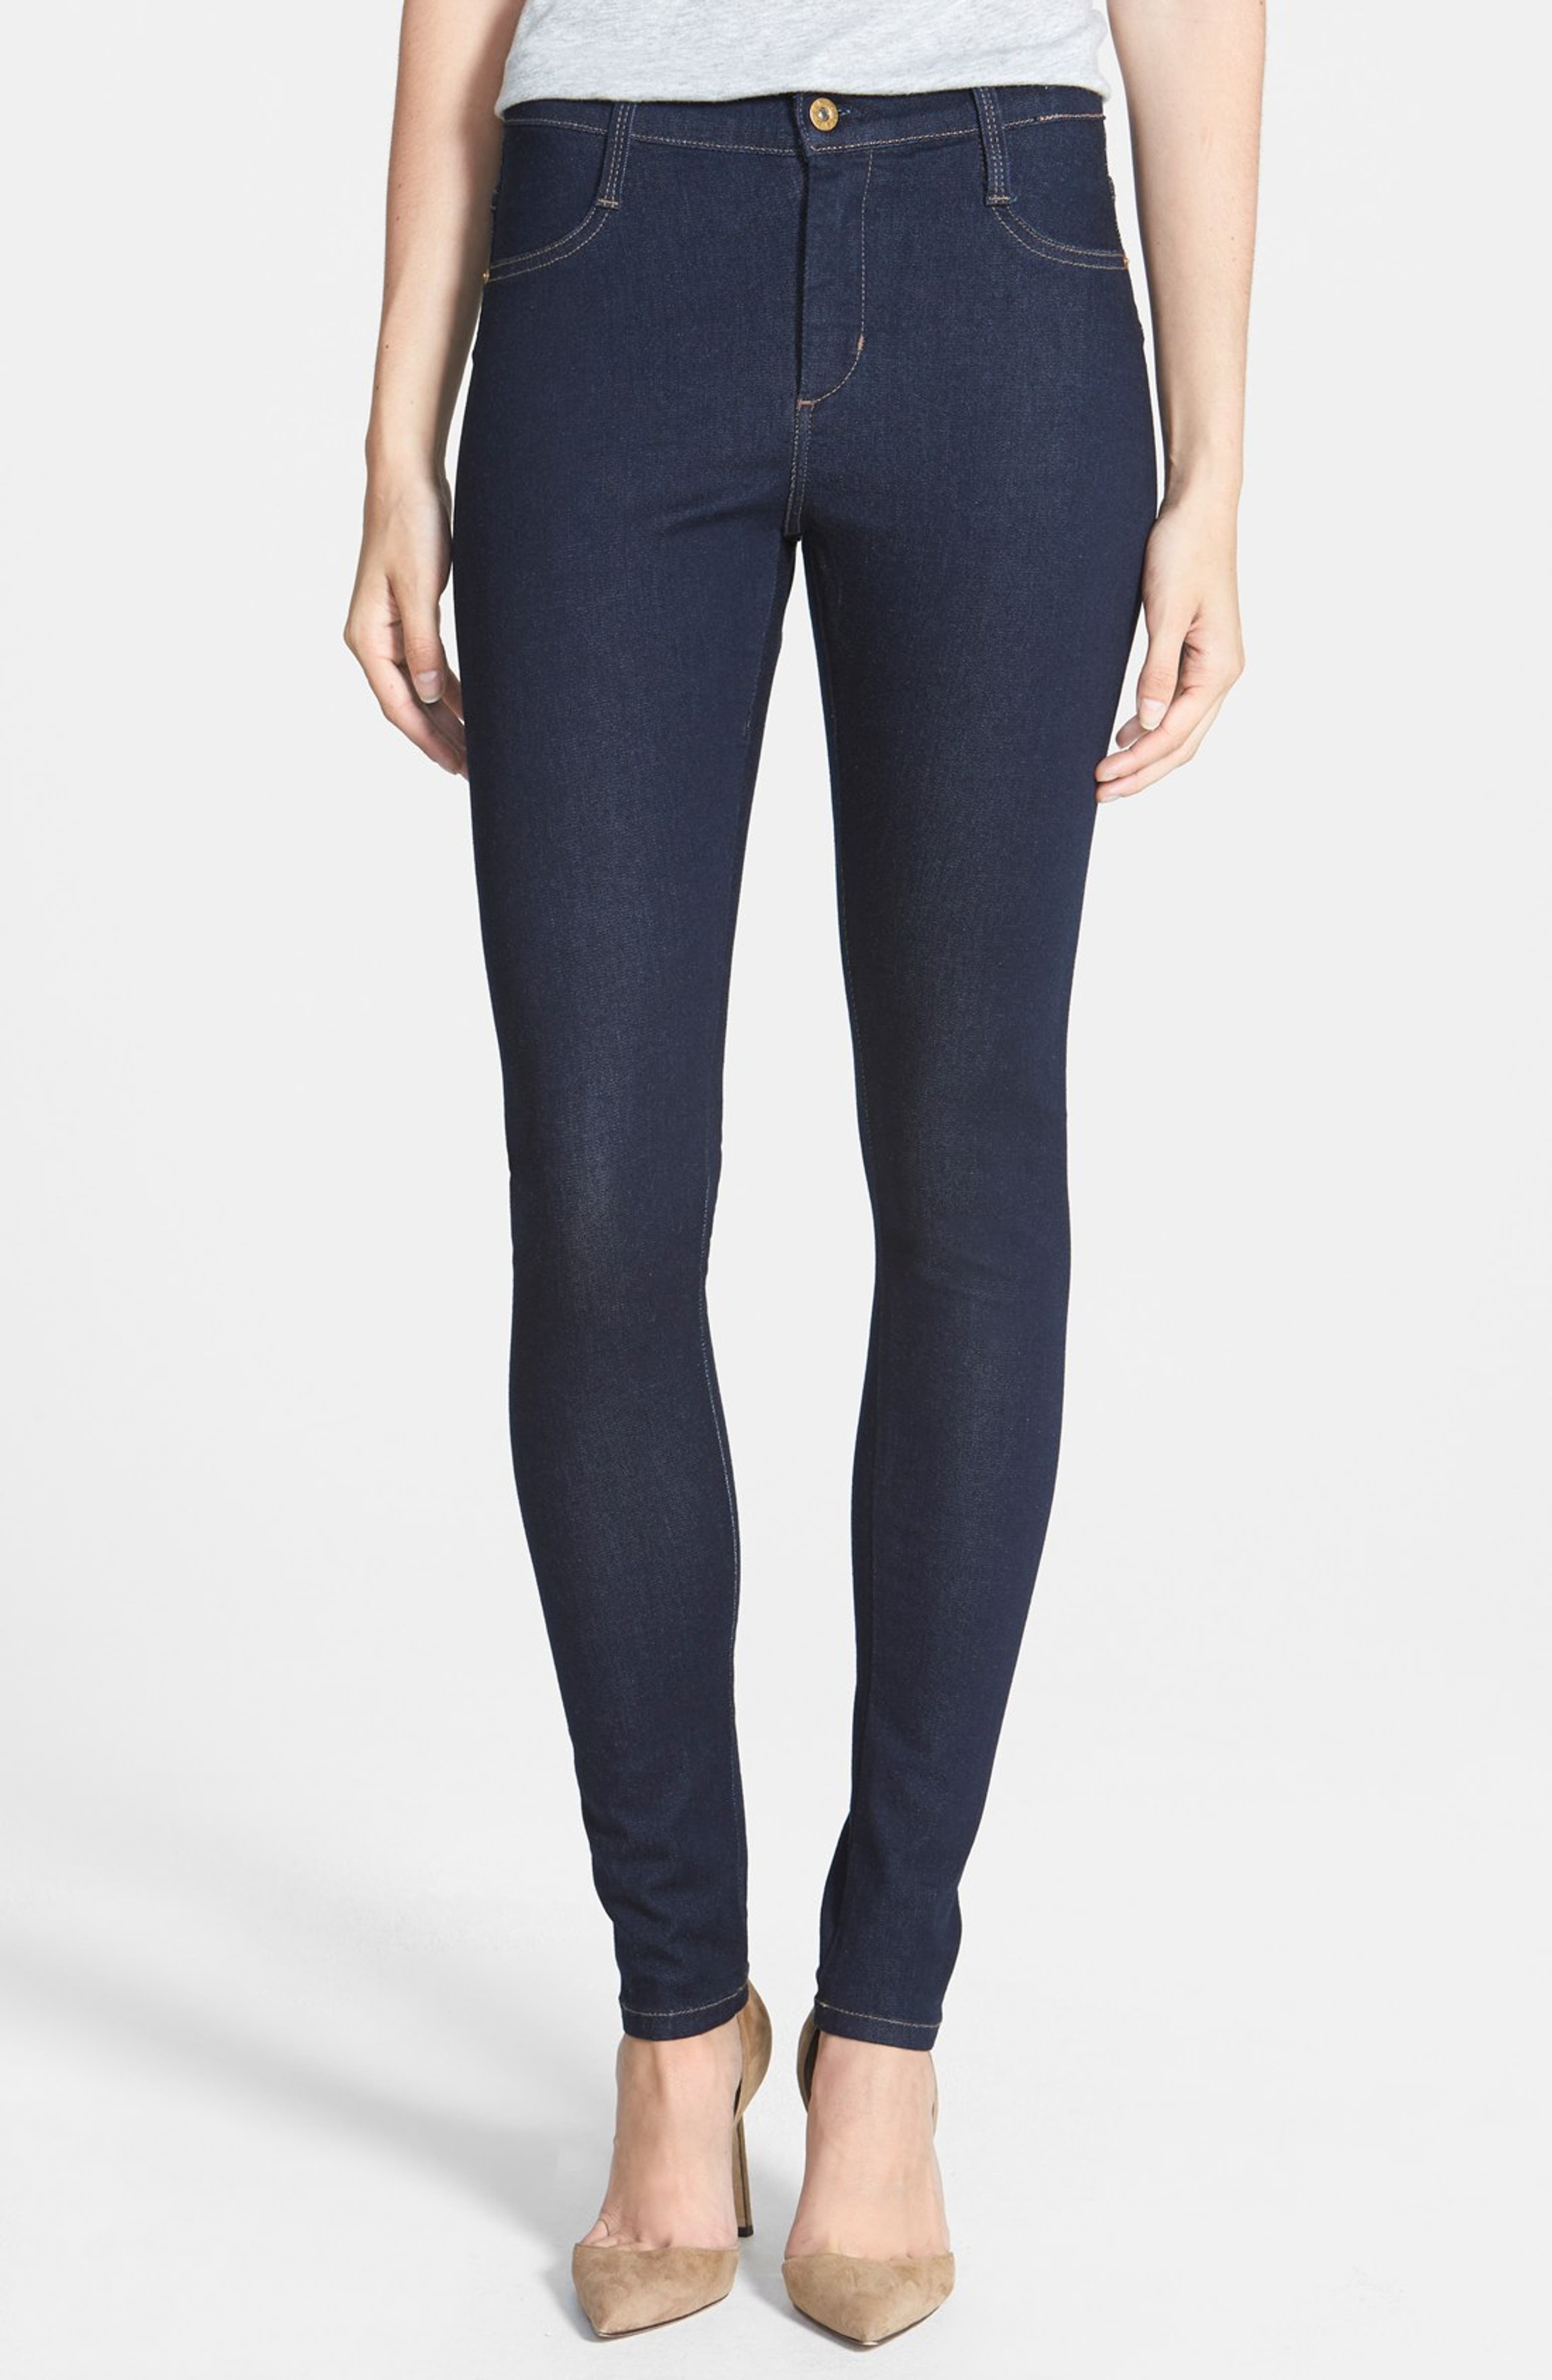 Stretchy Leggings That Look Like Jeans  International Society of Precision  Agriculture